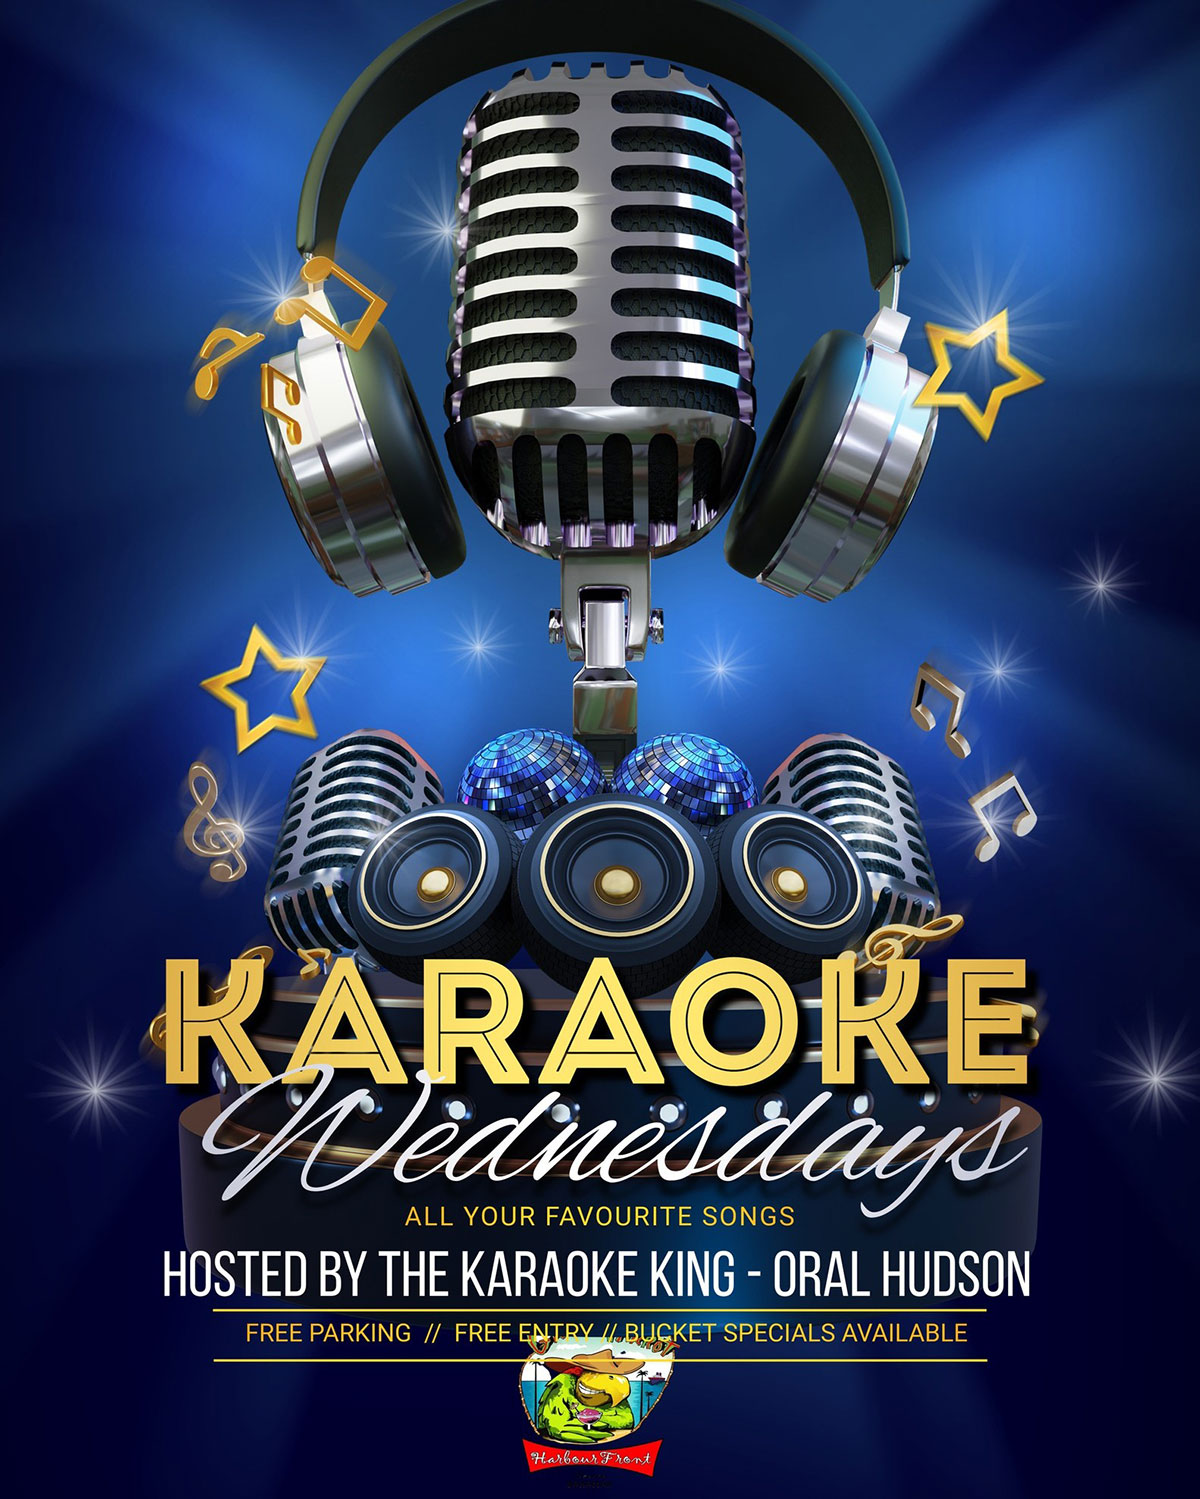 Wednesday, is none other than Karaoke at Green Parrot Bar & Grill